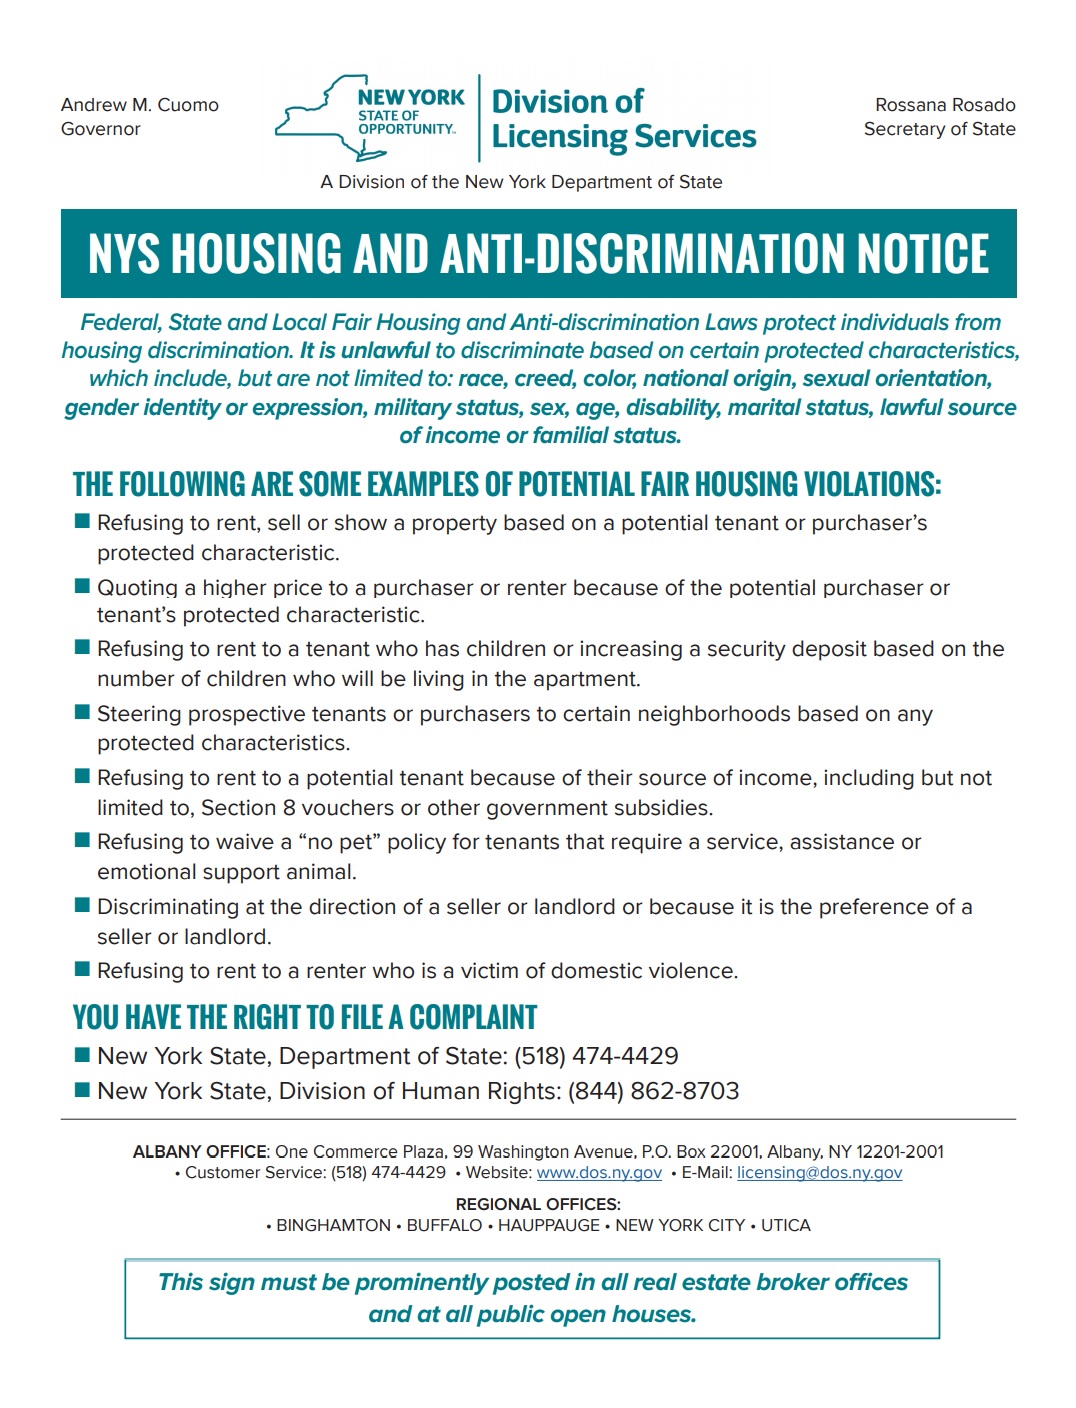 NYS Housing and Anti-Discrimination Notice of TESO Property Management in Middletown